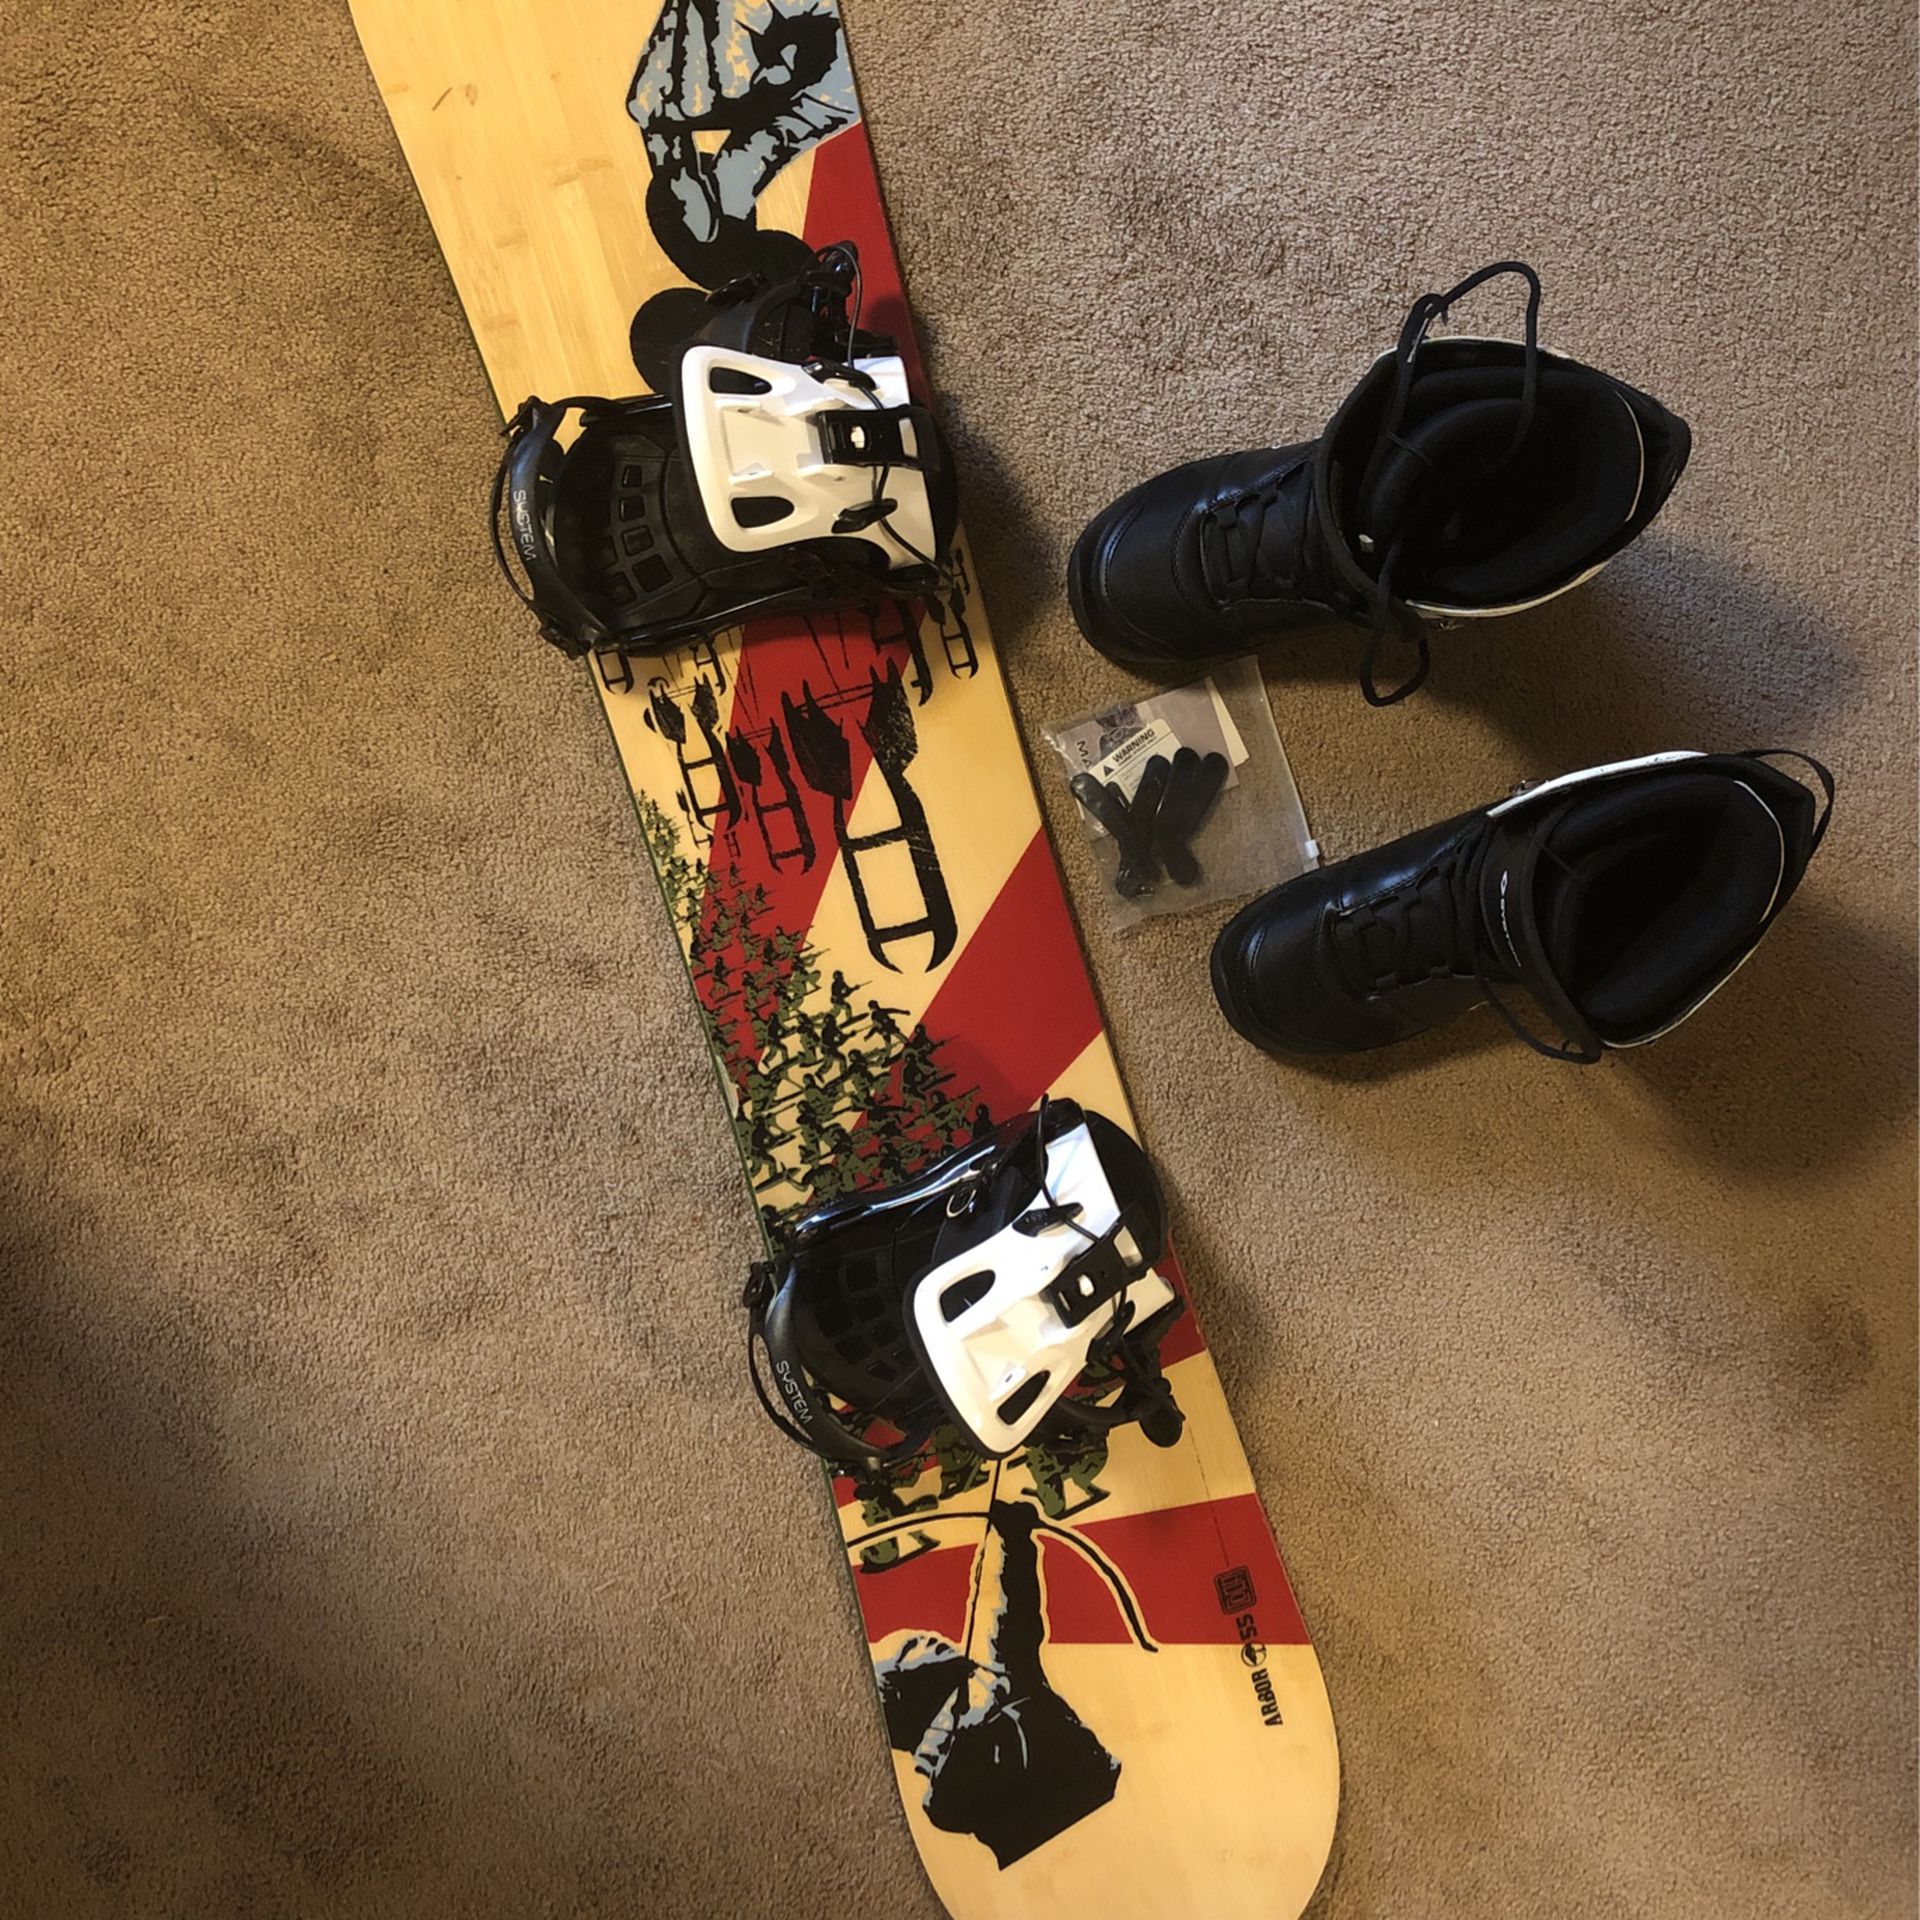 Snowboard With Bindings And Boots